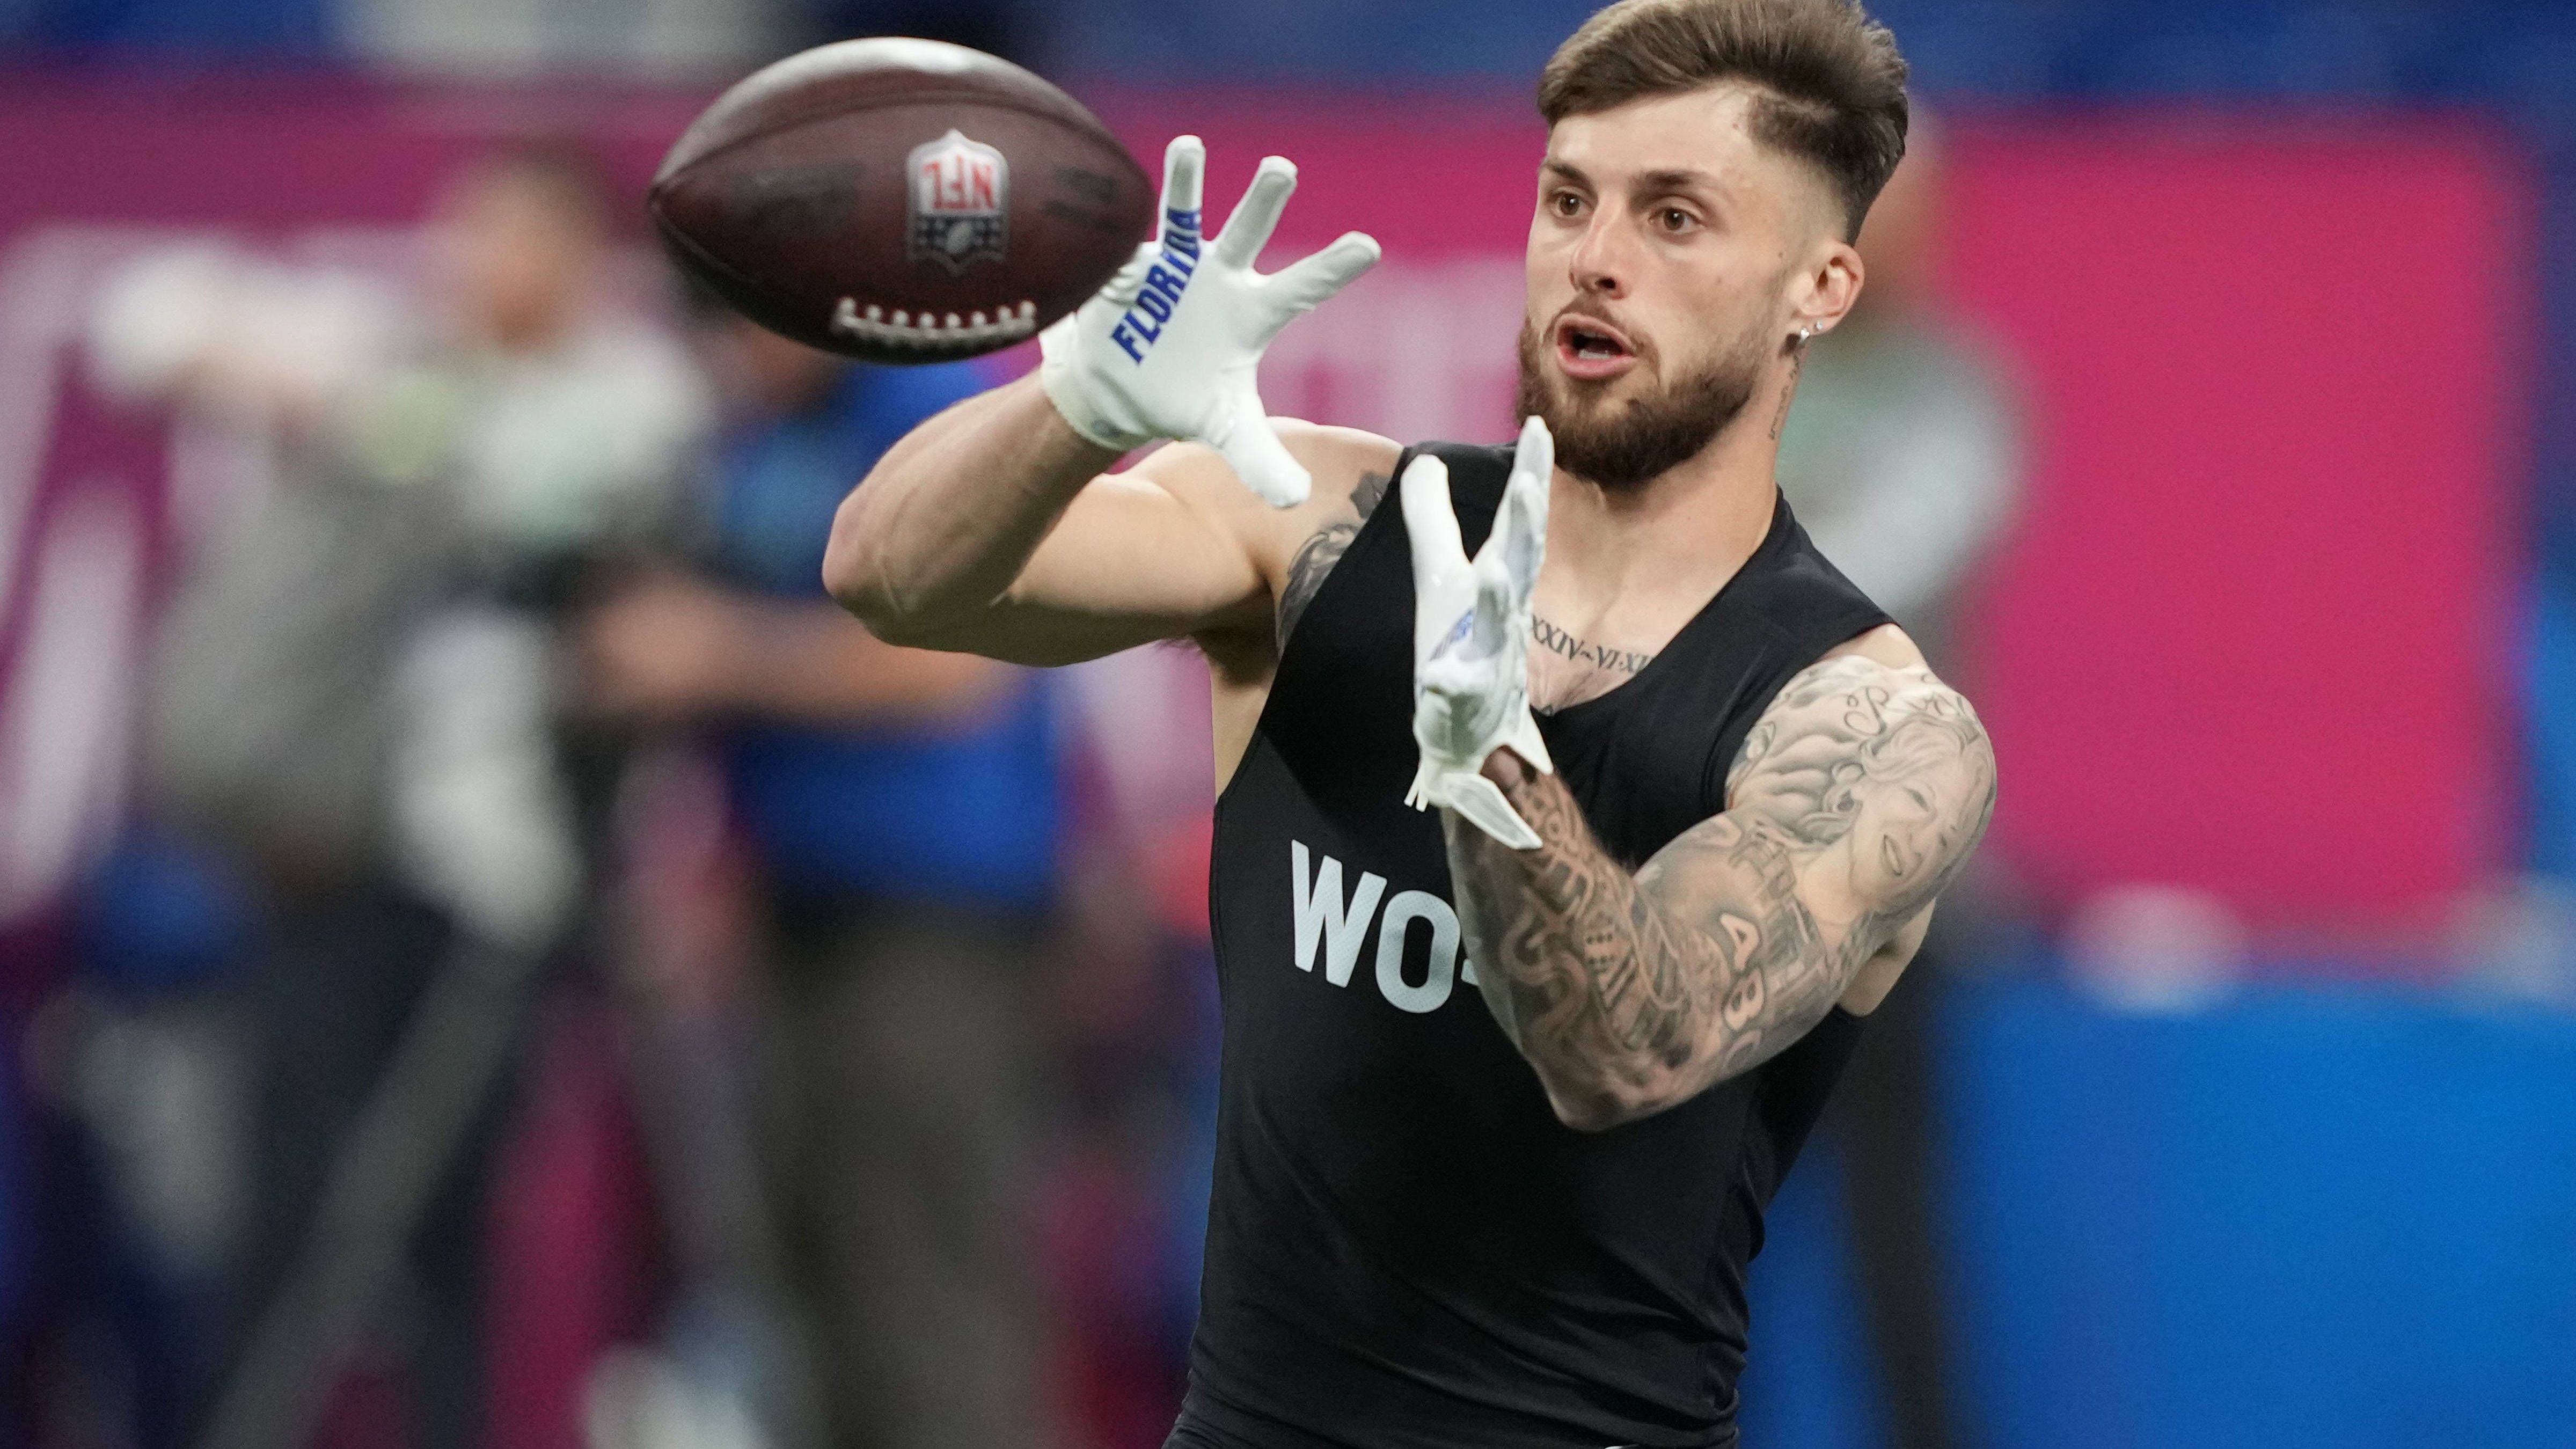 <strong>San Francisco 49ers - 9 Picks<br></strong>1. Runde: 31. Pick: WR Ricky Pearsall (Foto)<br>2. Runde: 64. Pick: CB Renardo Green (via Chiefs)<br>3. Runde: 86. Pick: G Dominick Puni (via Eagles)<br>4. Runde: 124. Pick: S Malik Mustapha (via Cowboys), 129. Pick: RB Isaac Guerendo (via Jets, from Detroit via Minnesota) 135. Pick: WR Jacob Cowing<br>6. Runde: 215. Pick: G Jarrett Kingston<br>7. Runde: 251. Pick: LB Tatum Bethune